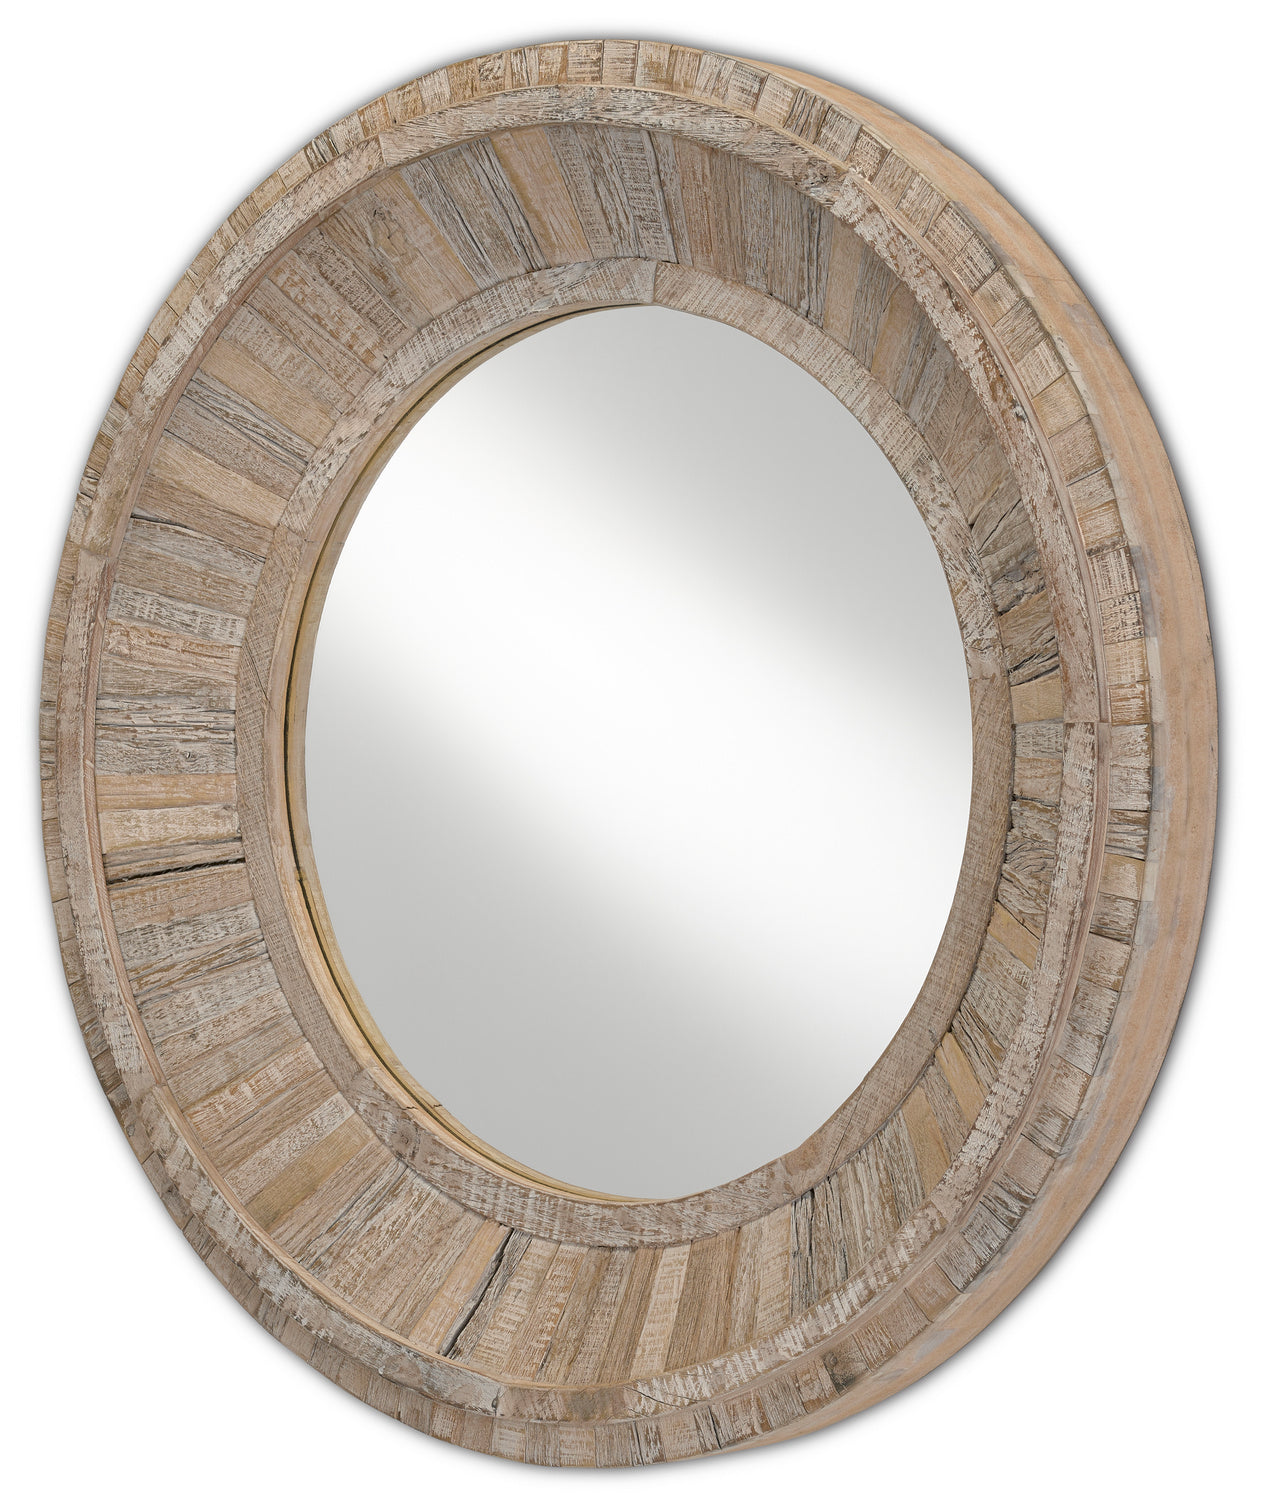 Mirror from the Kanor collection in Whitewash/Mirror finish